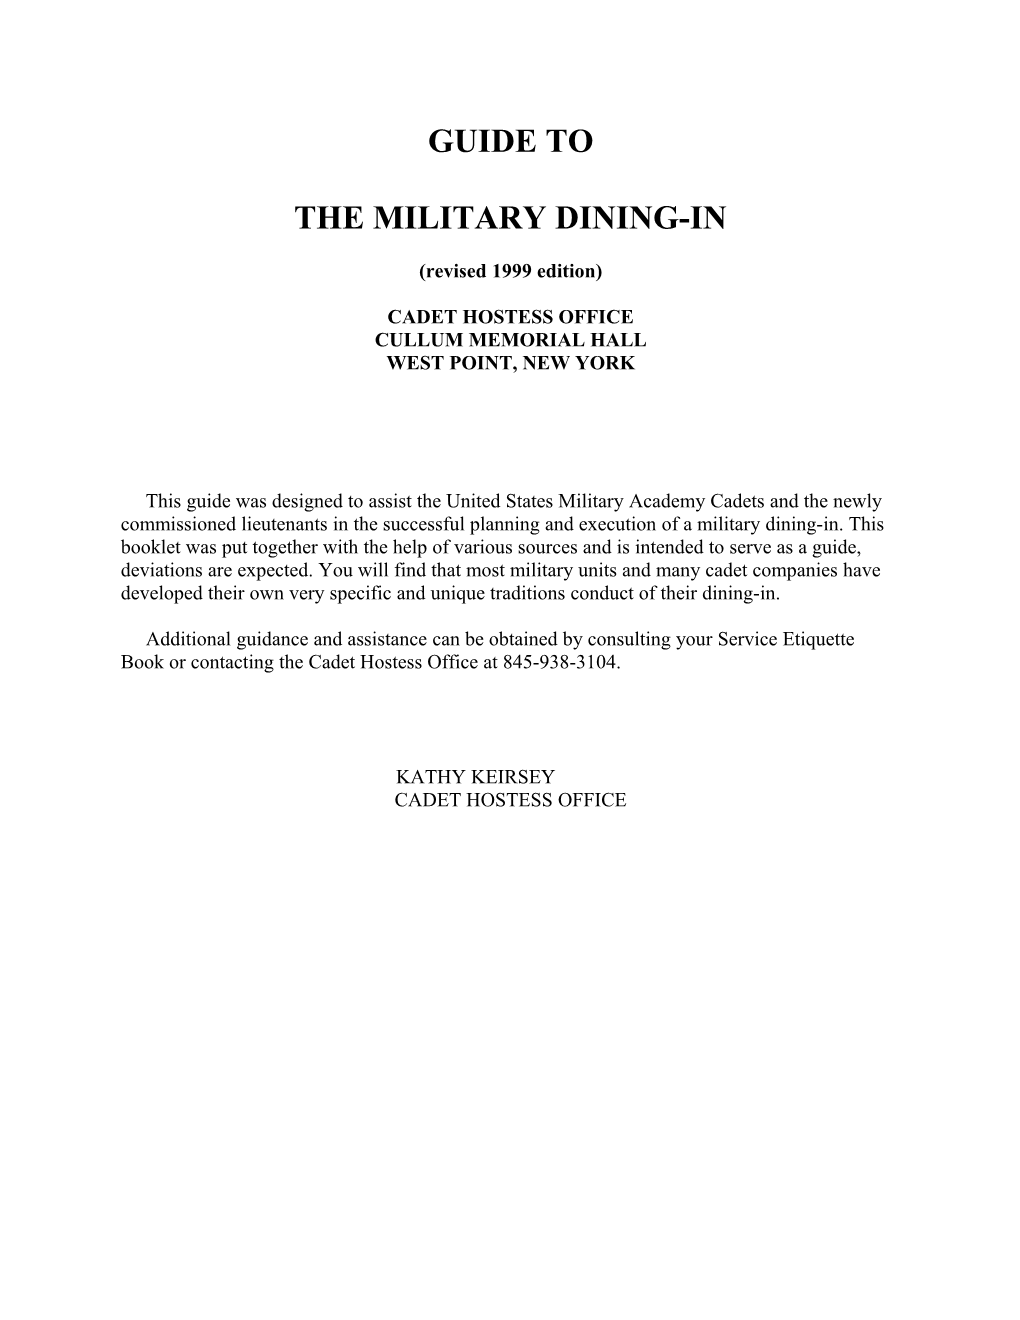 The Military Dining-In